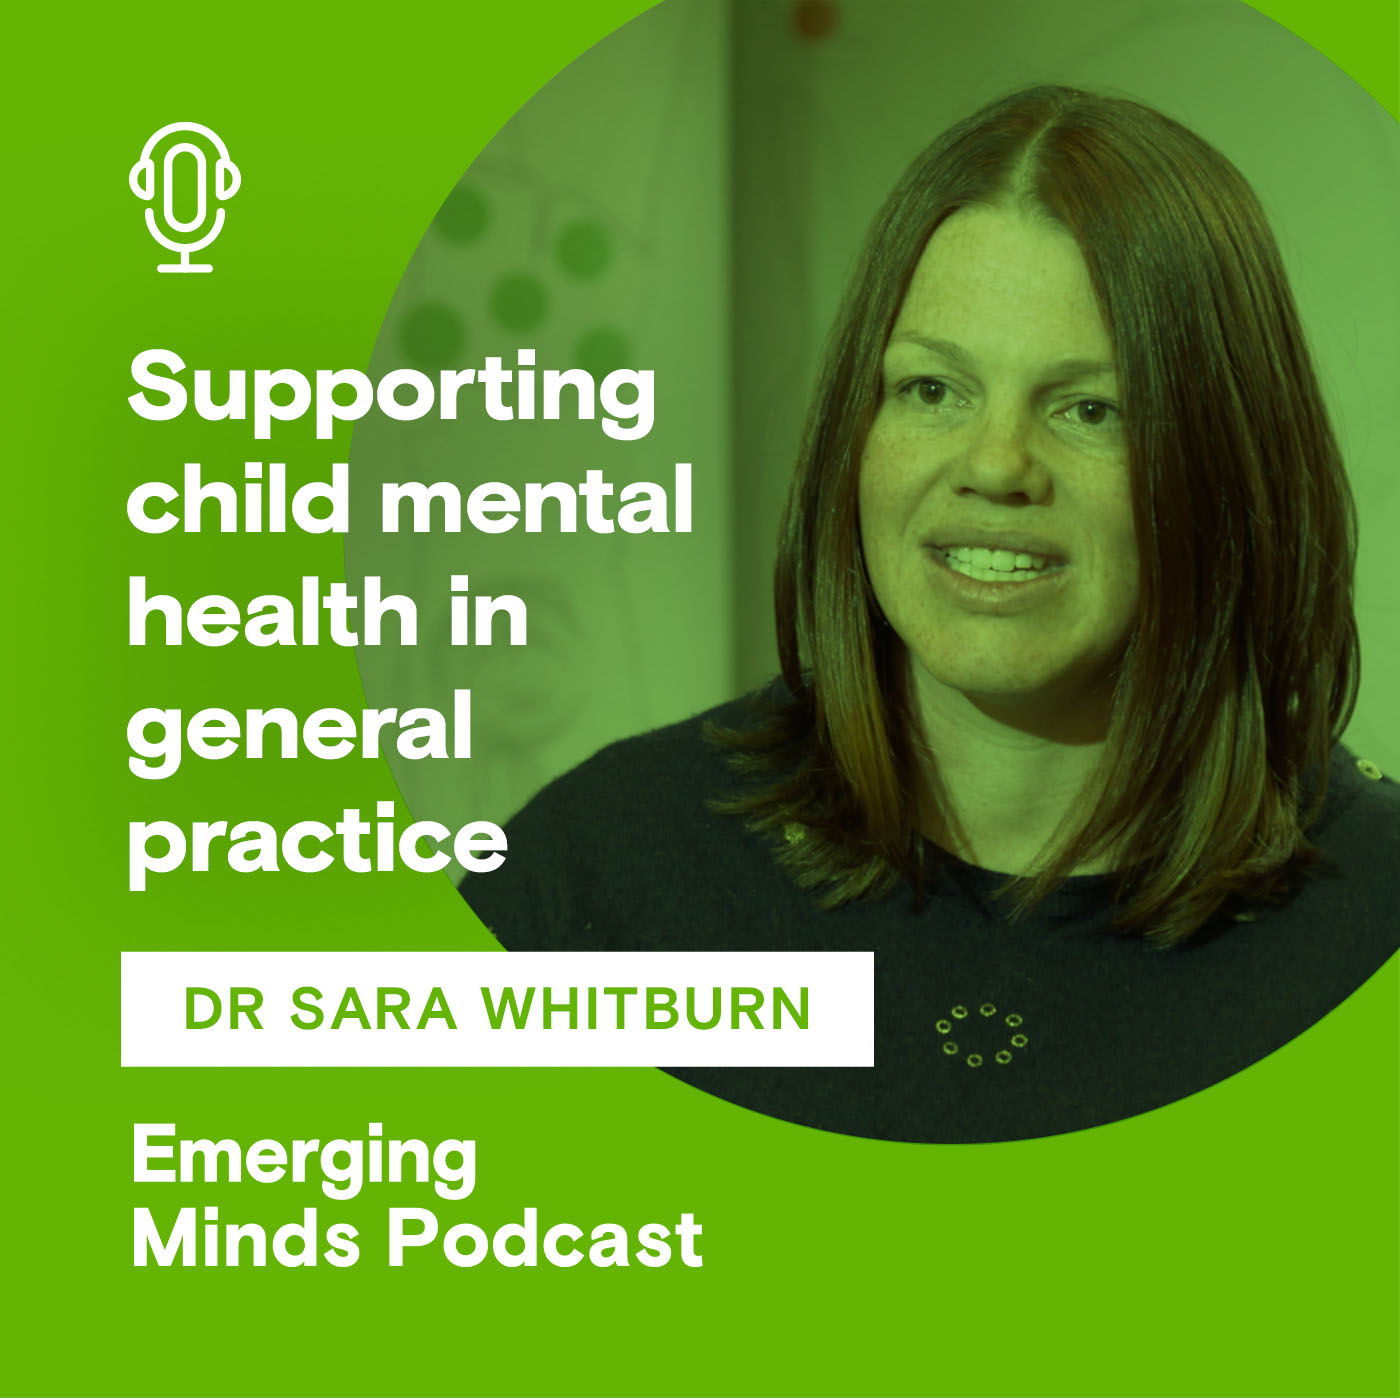 Supporting child mental health in general practice